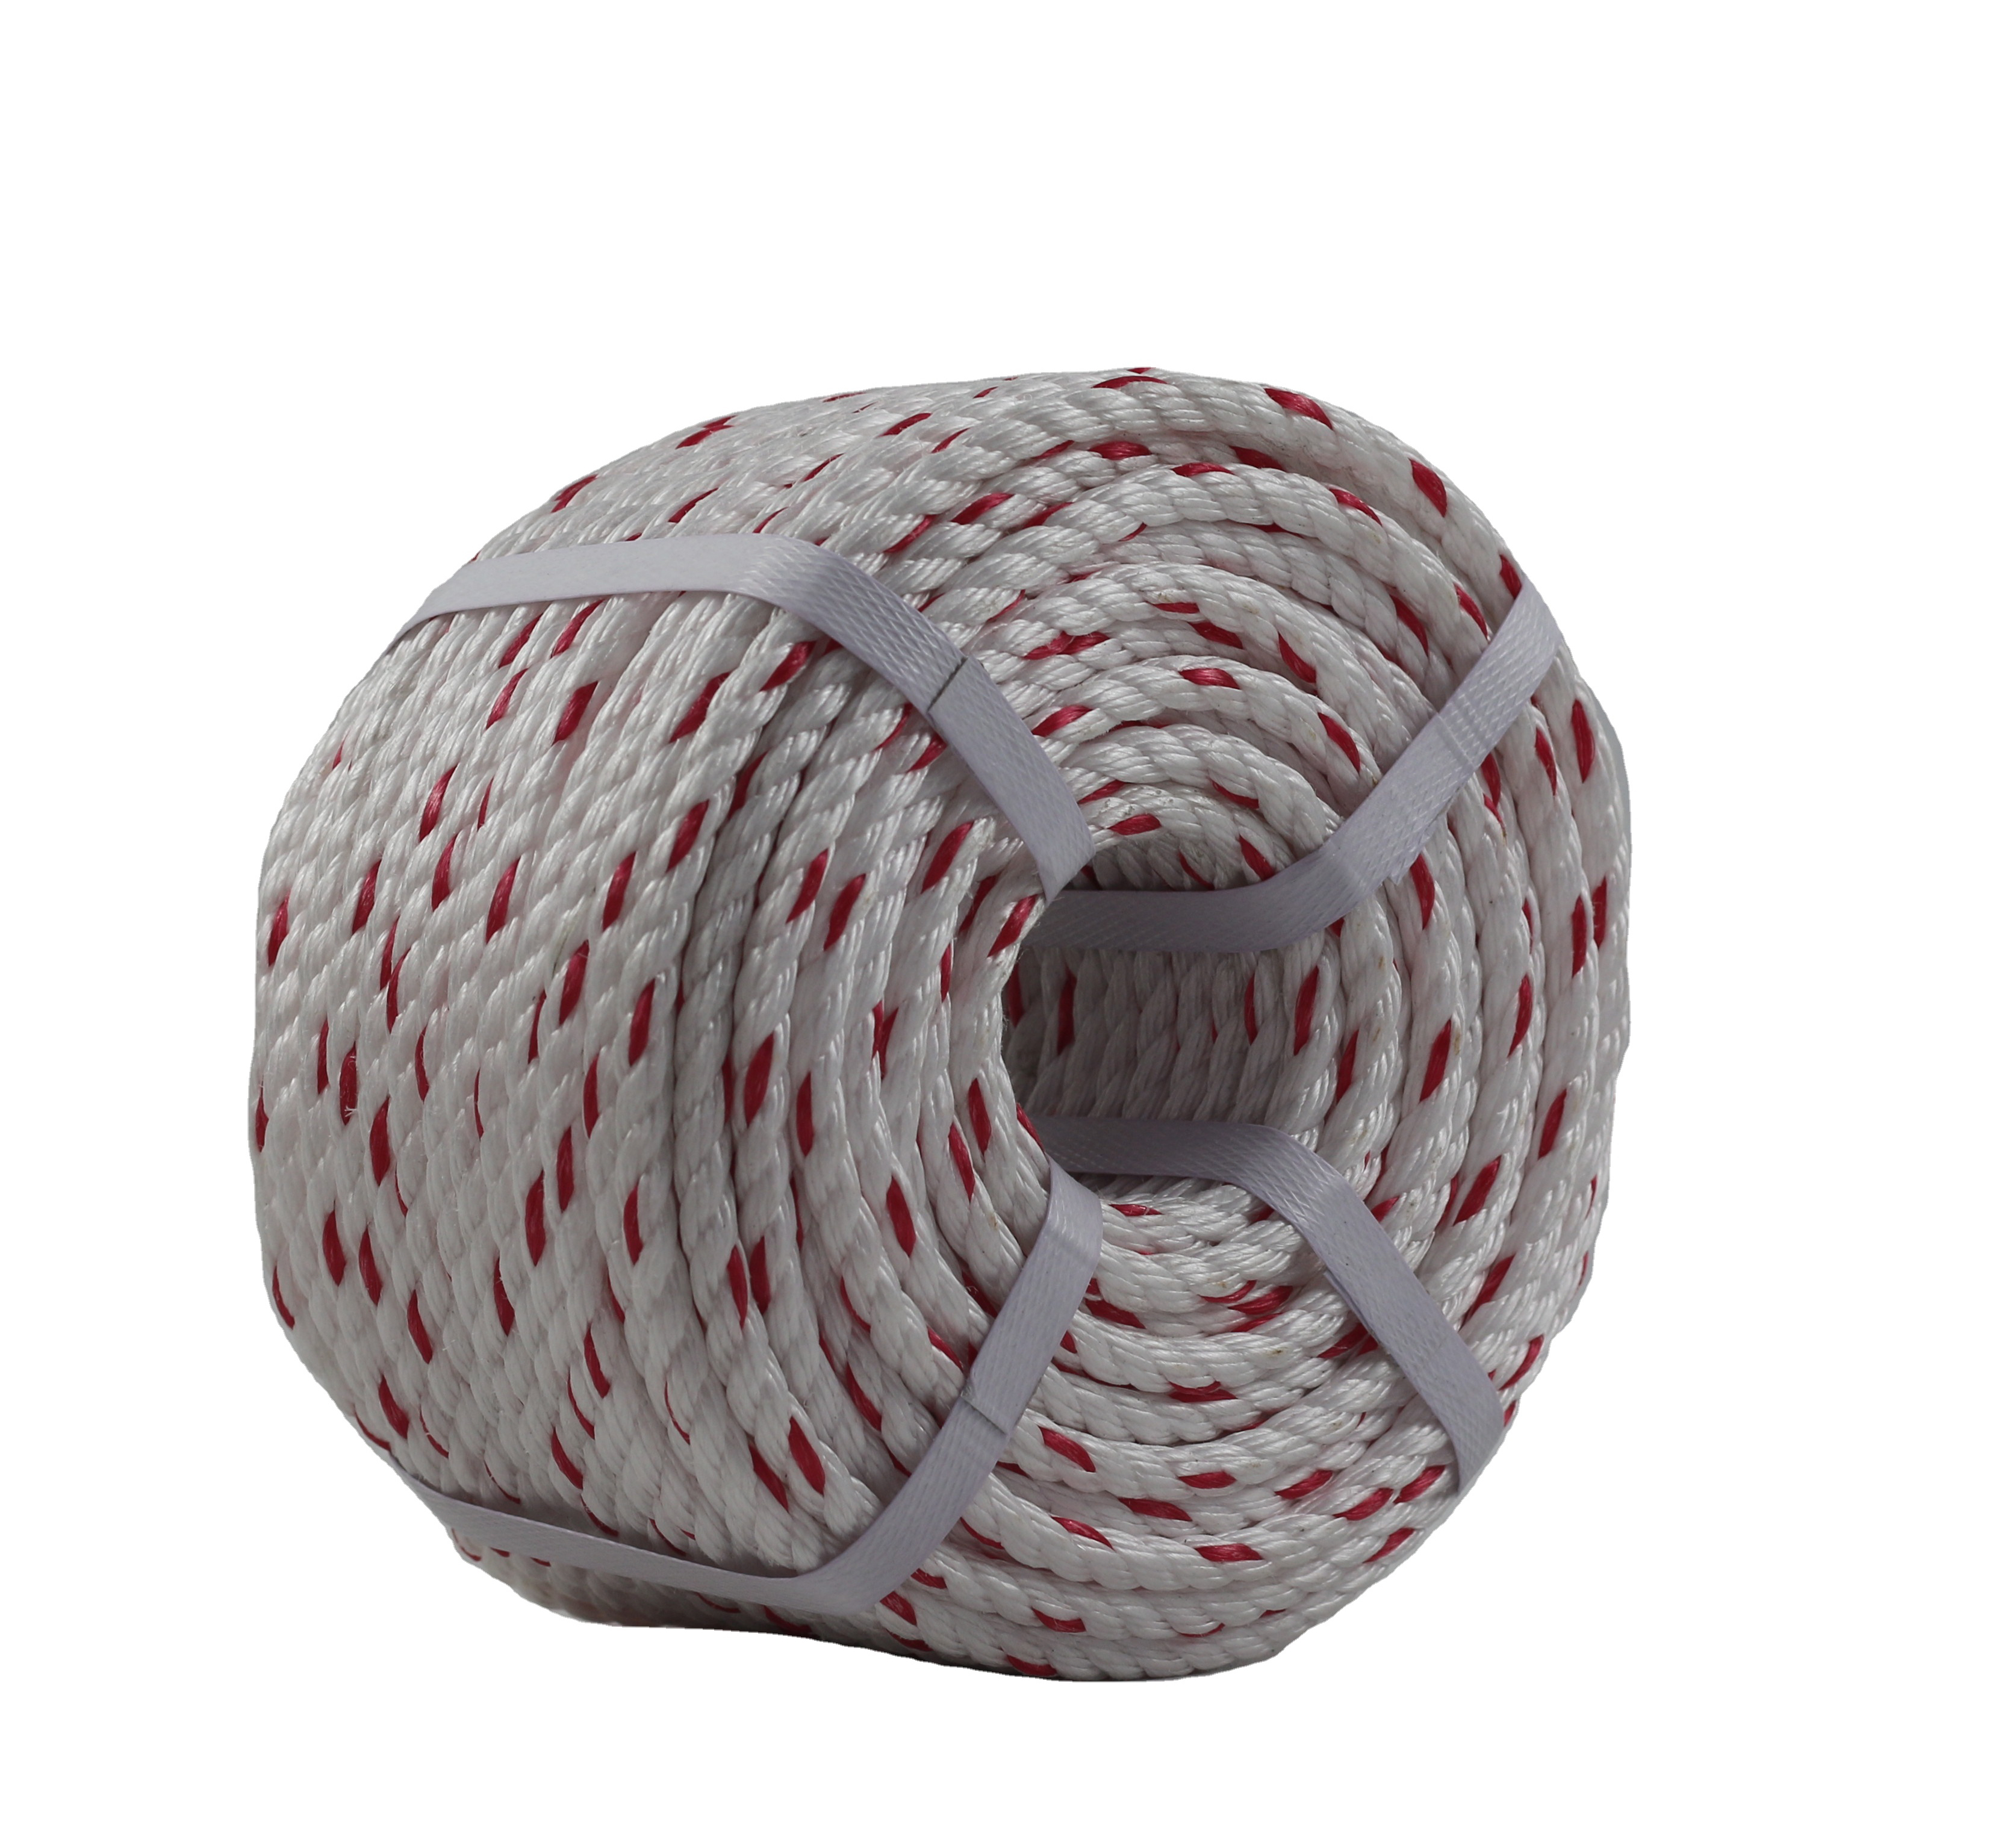 High-Quality Polypropylene Rope in Vibrant Colors for All Your Needs